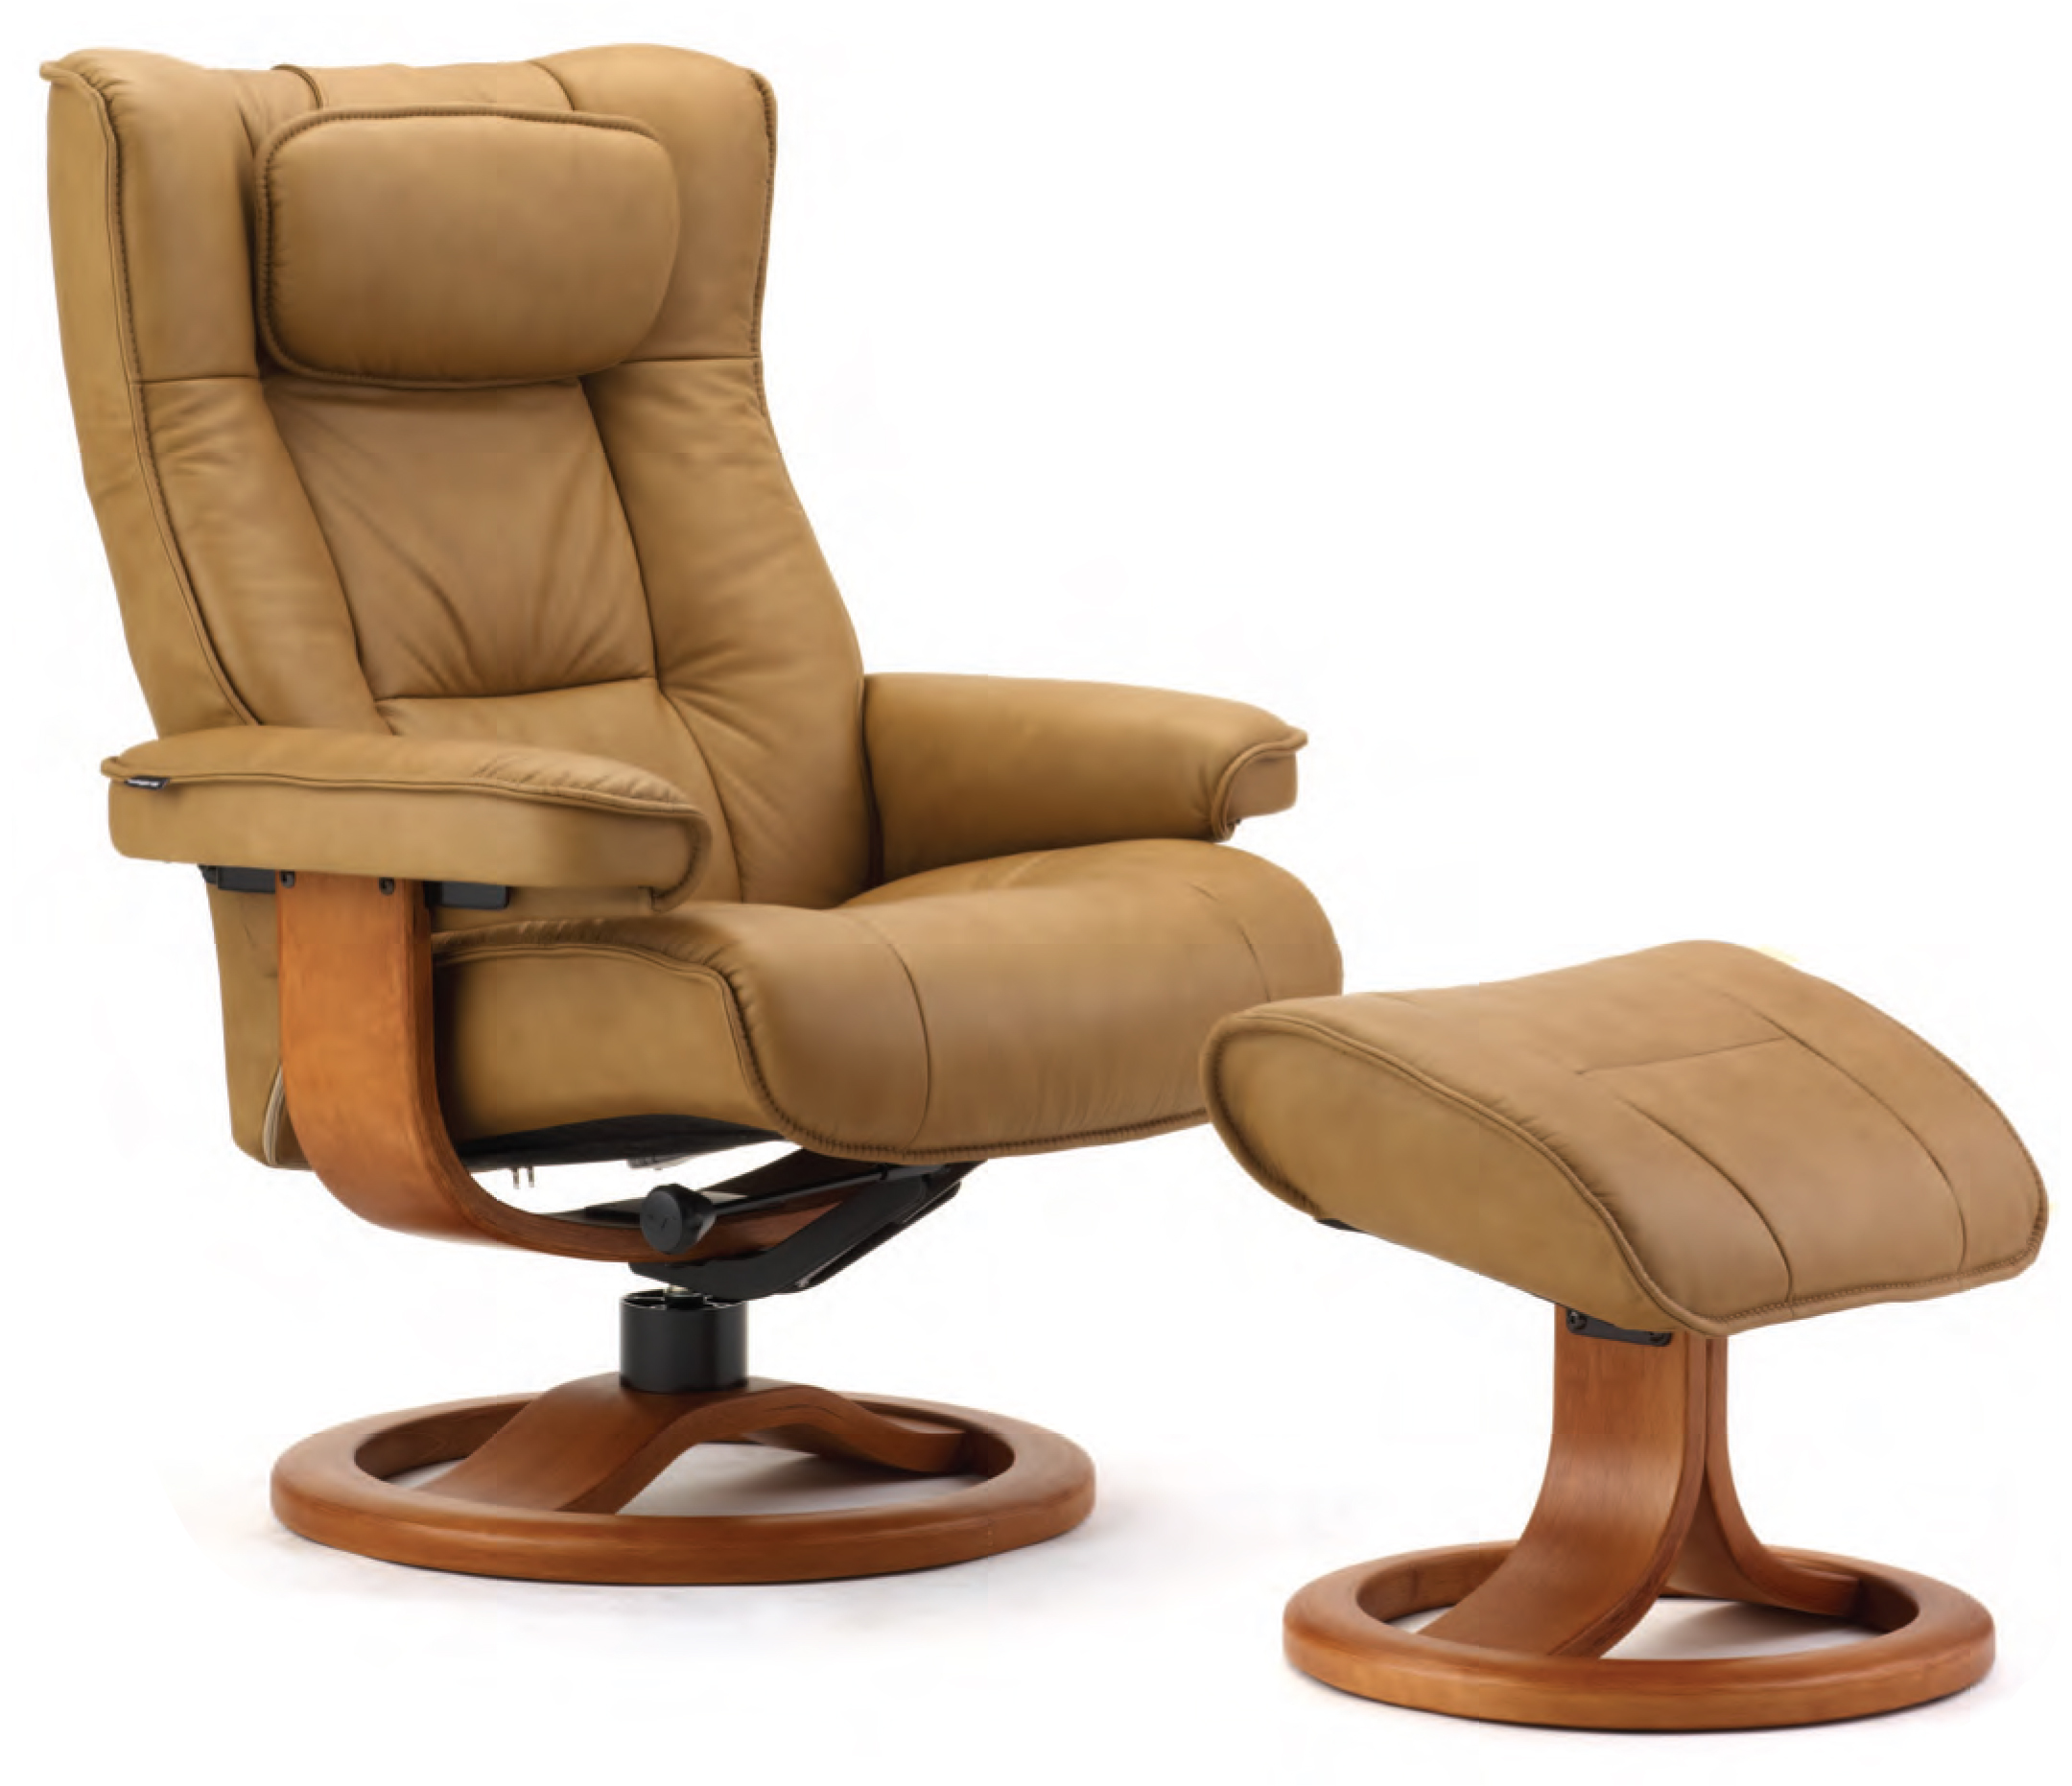 Leather Recliner Chair Ottoman, Scandinavian Leather Recliners